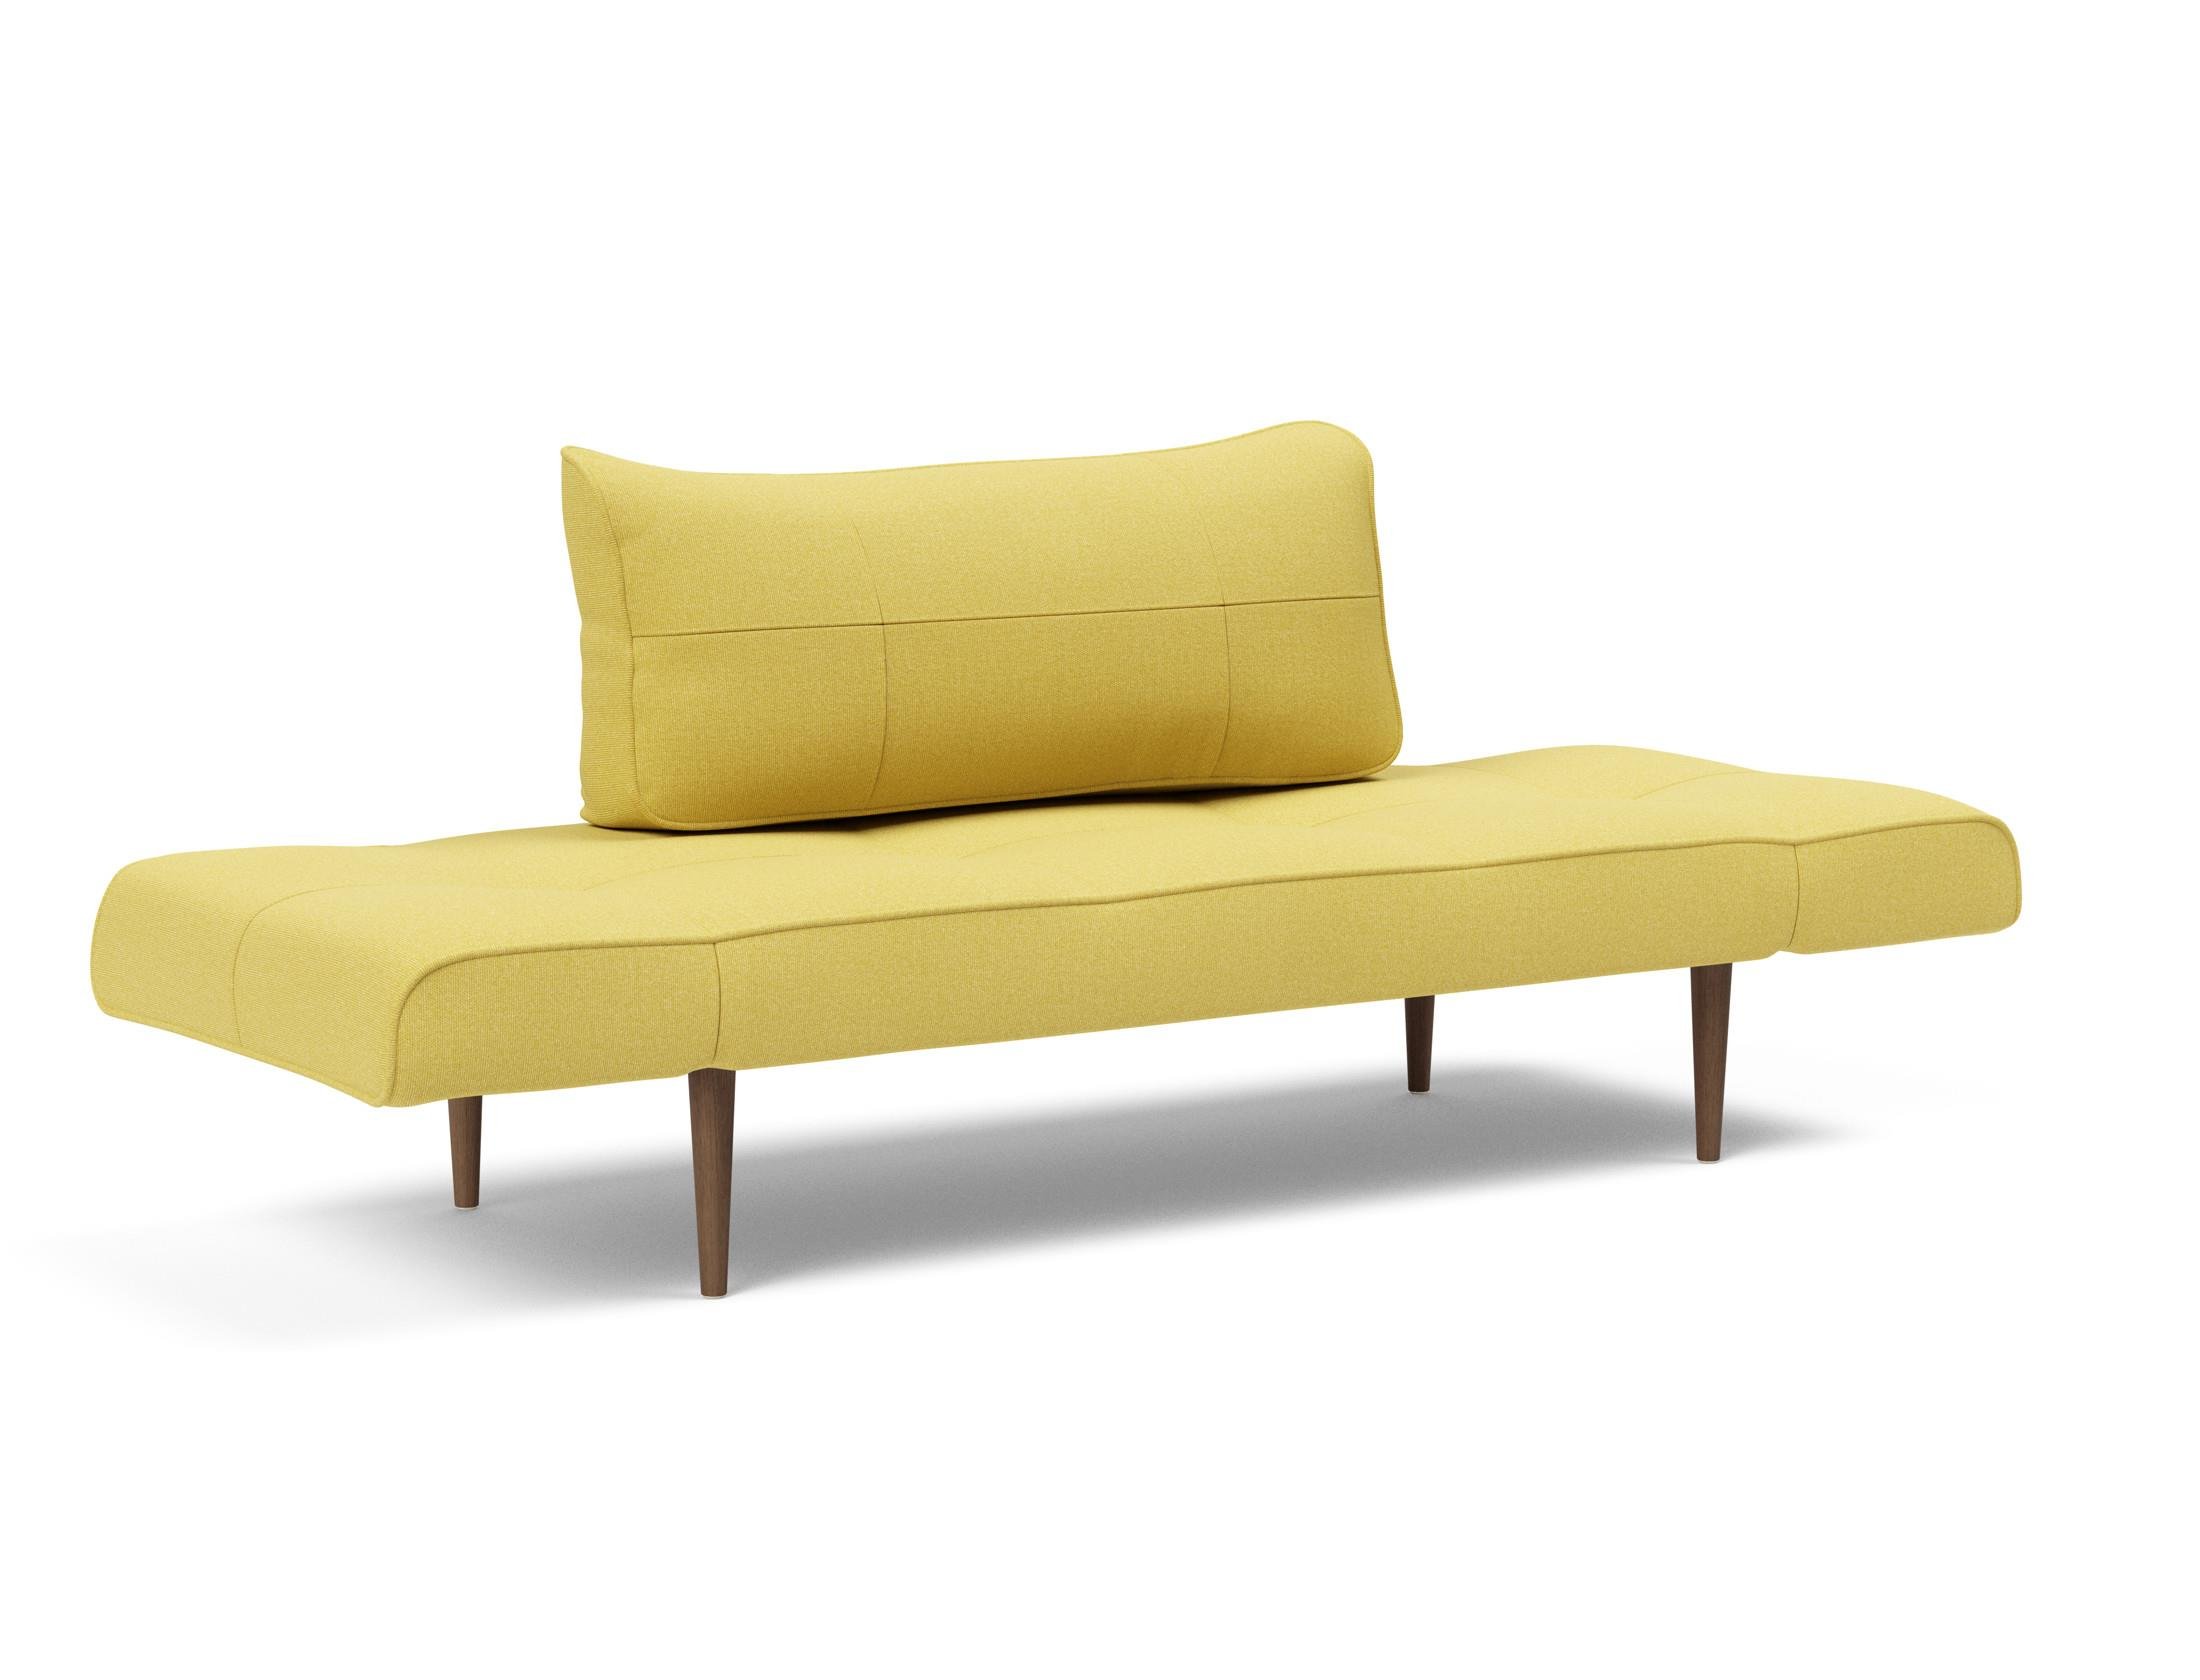 Zeal-Styletto-Daybed-554-p7-web.jpg